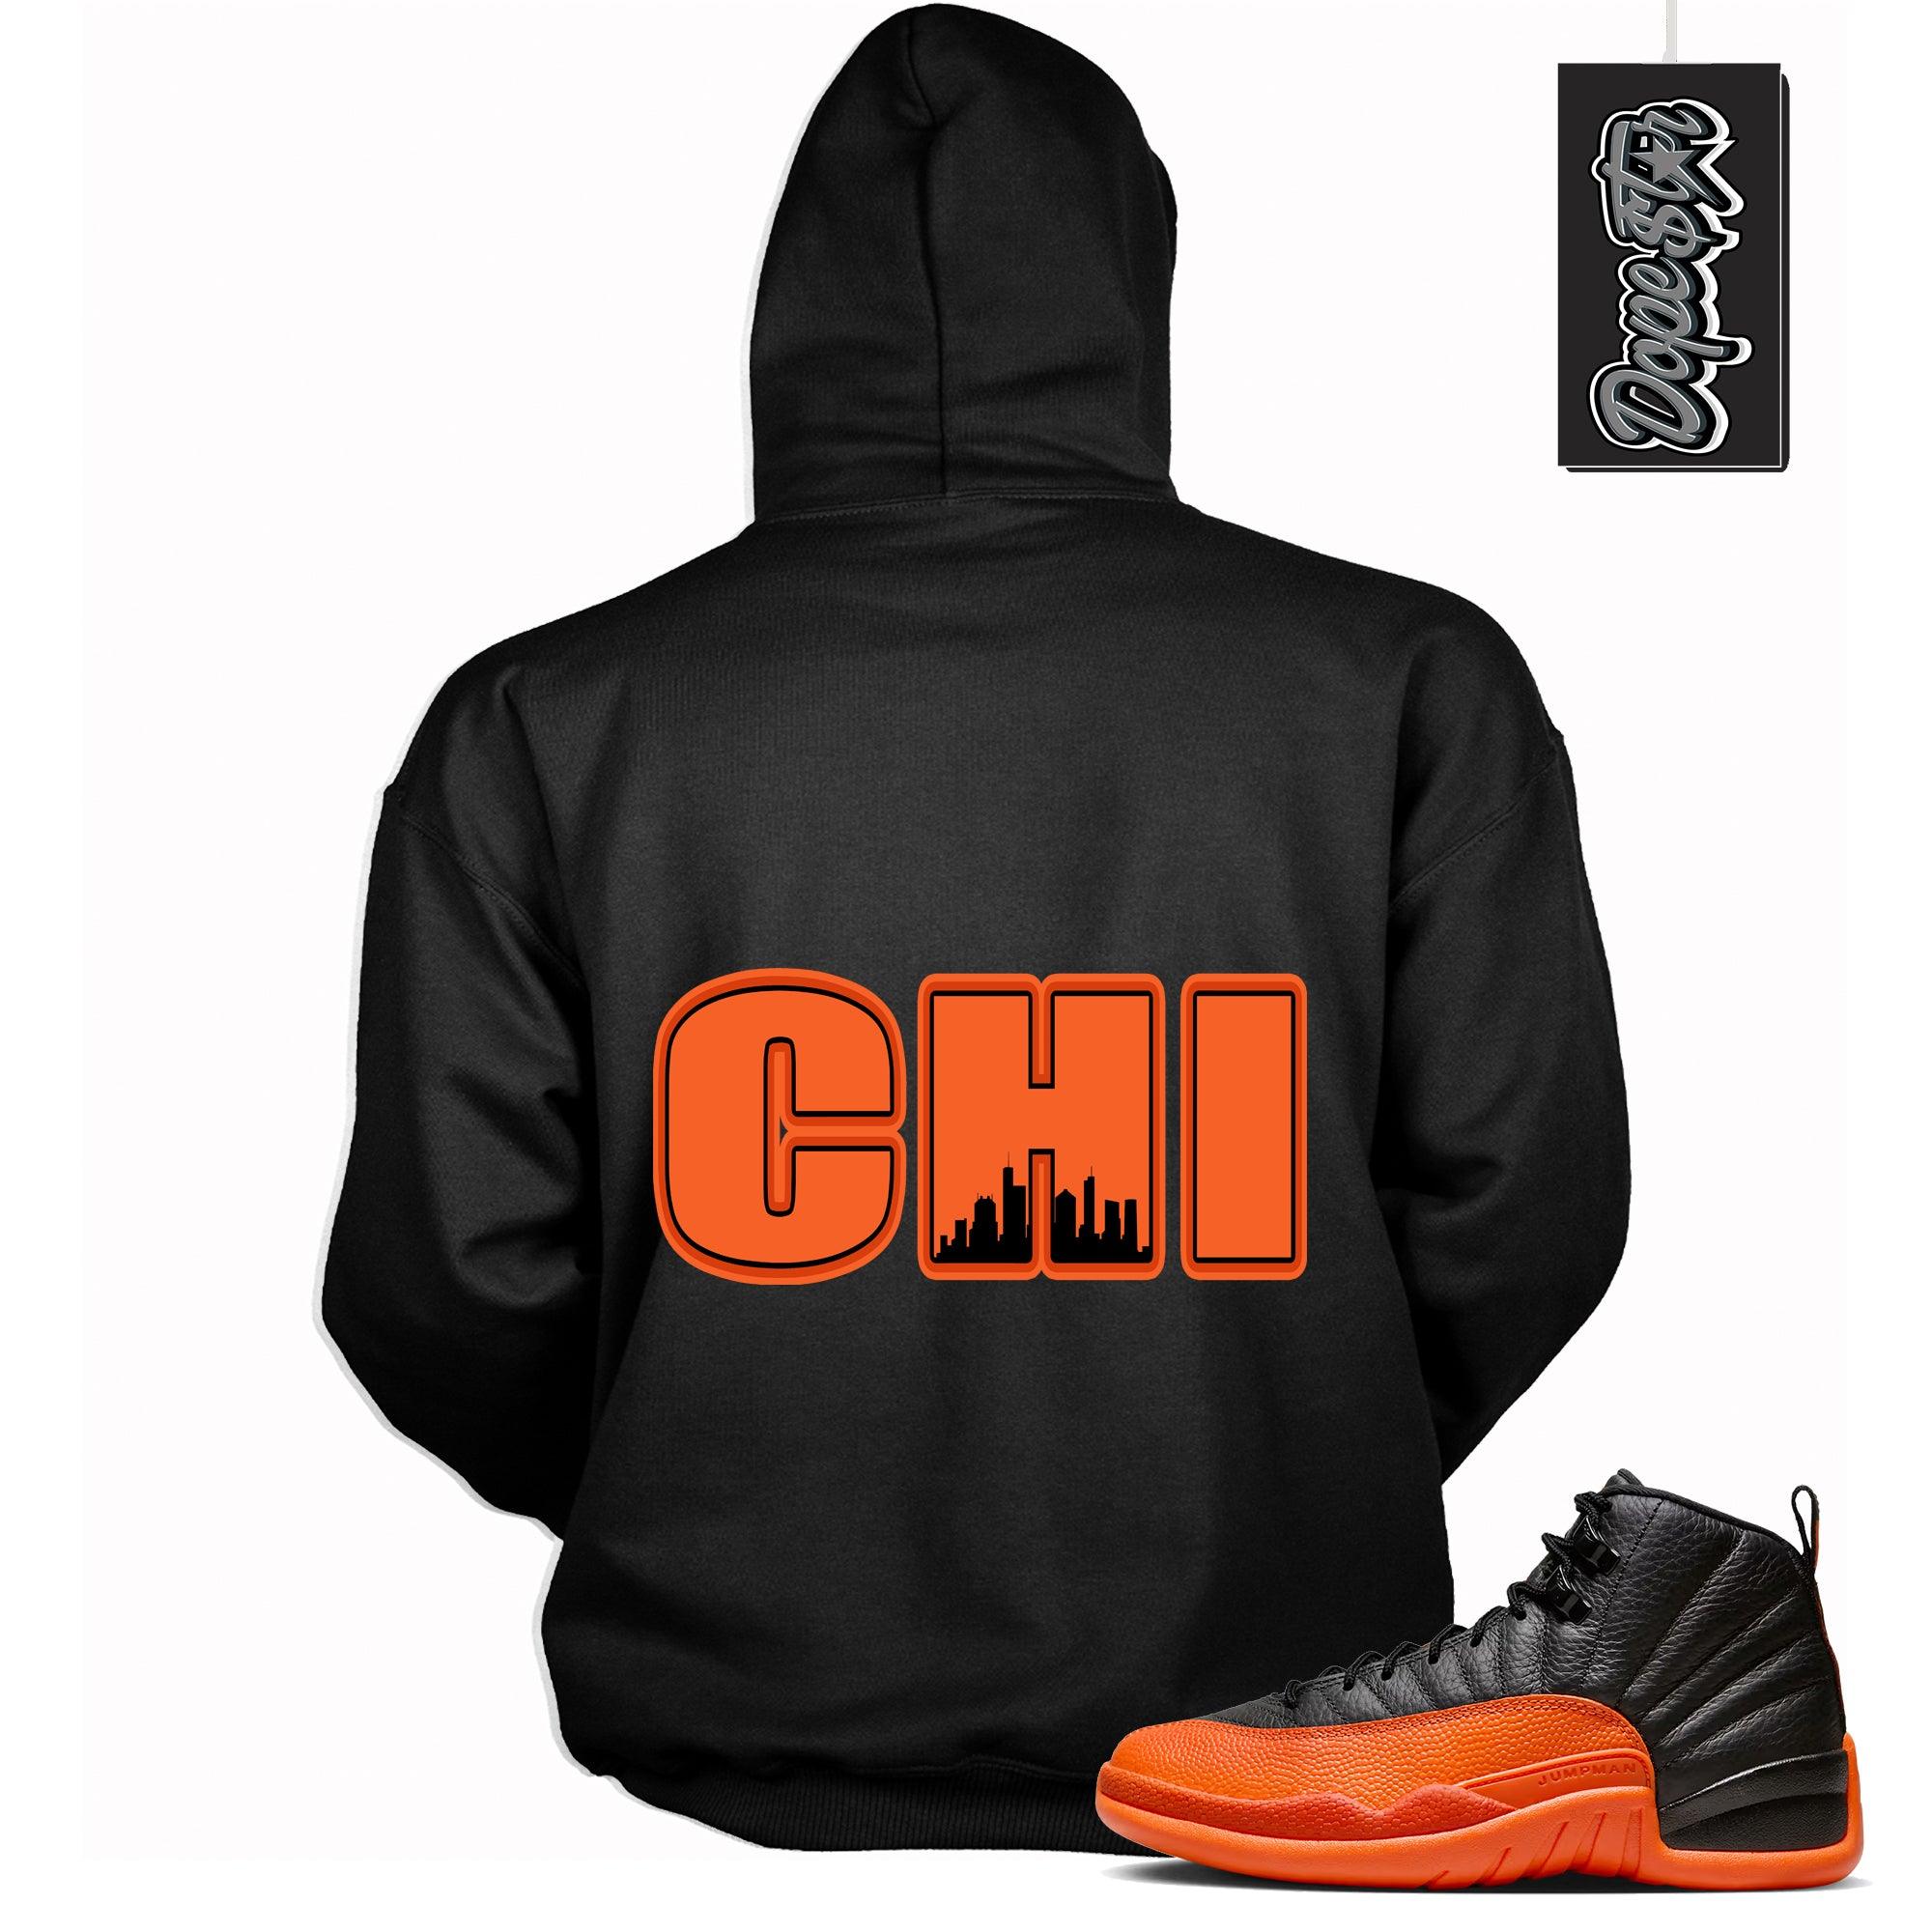 Cool Black Graphic Hoodie with “ Chicago “ print, that perfectly matches Air Jordan 12 Retro WNBA All-Star Brilliant Orange  sneakers